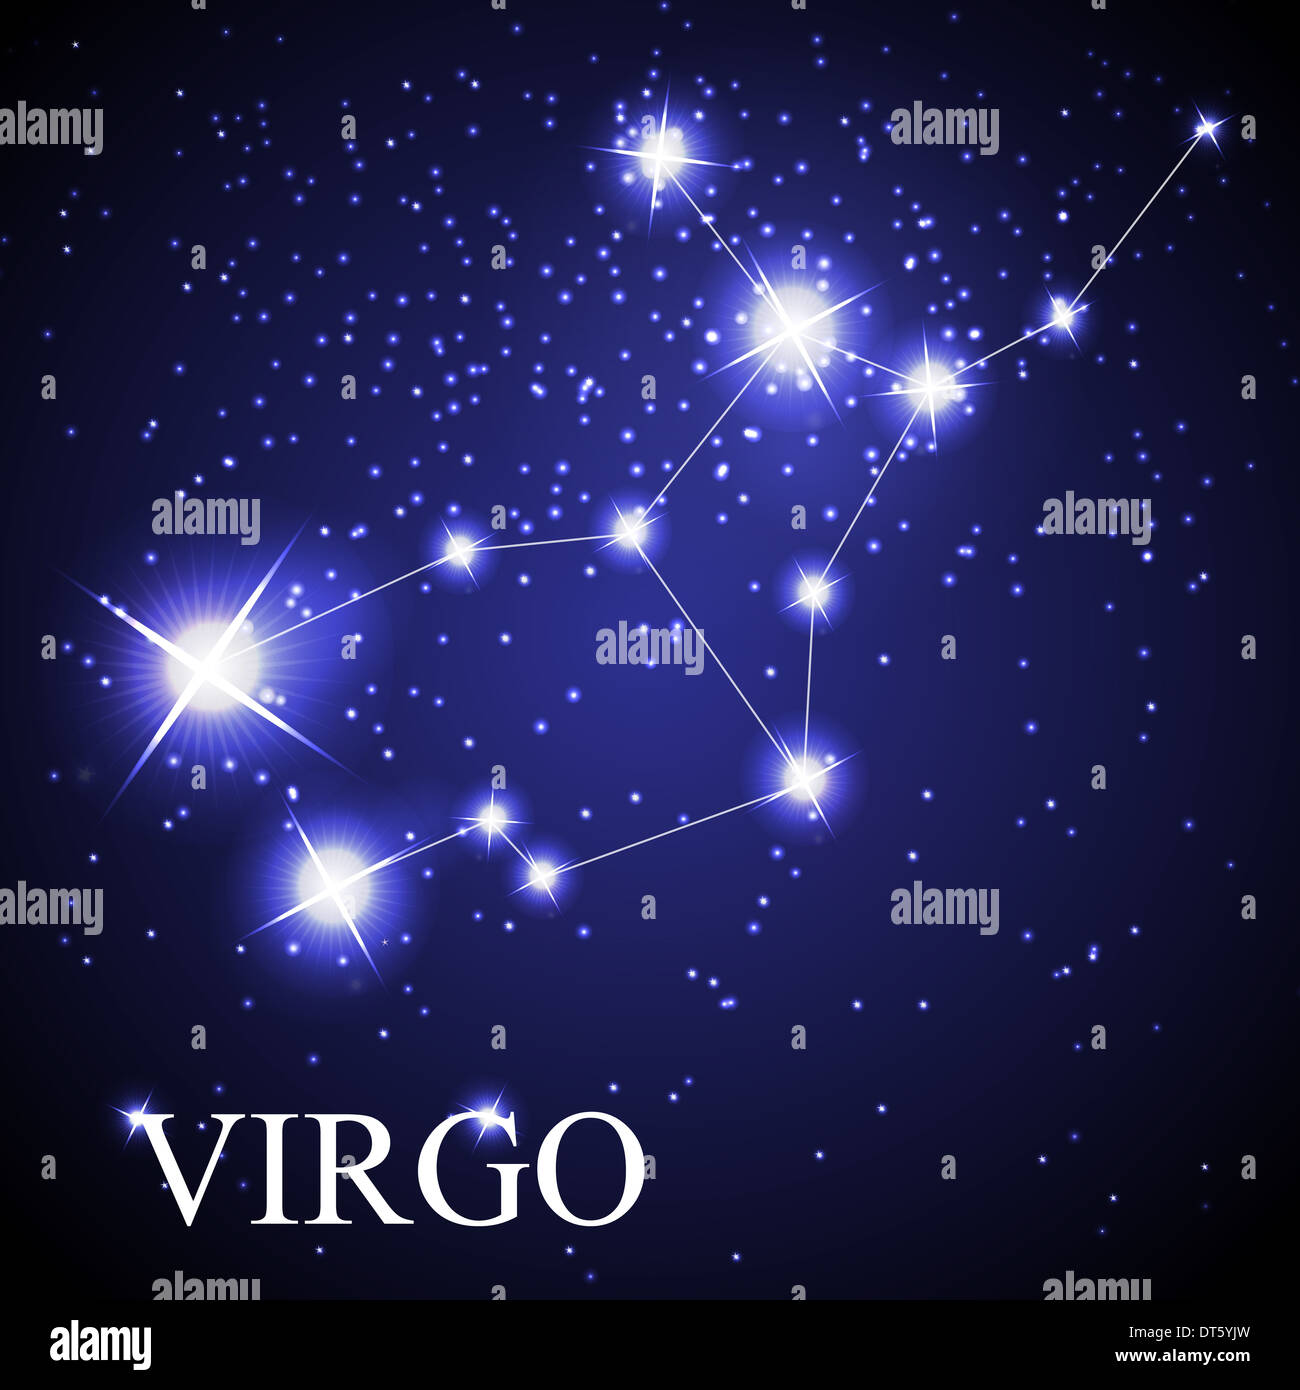 Virgo zodiac sign of the beautiful bright stars on the background of ...